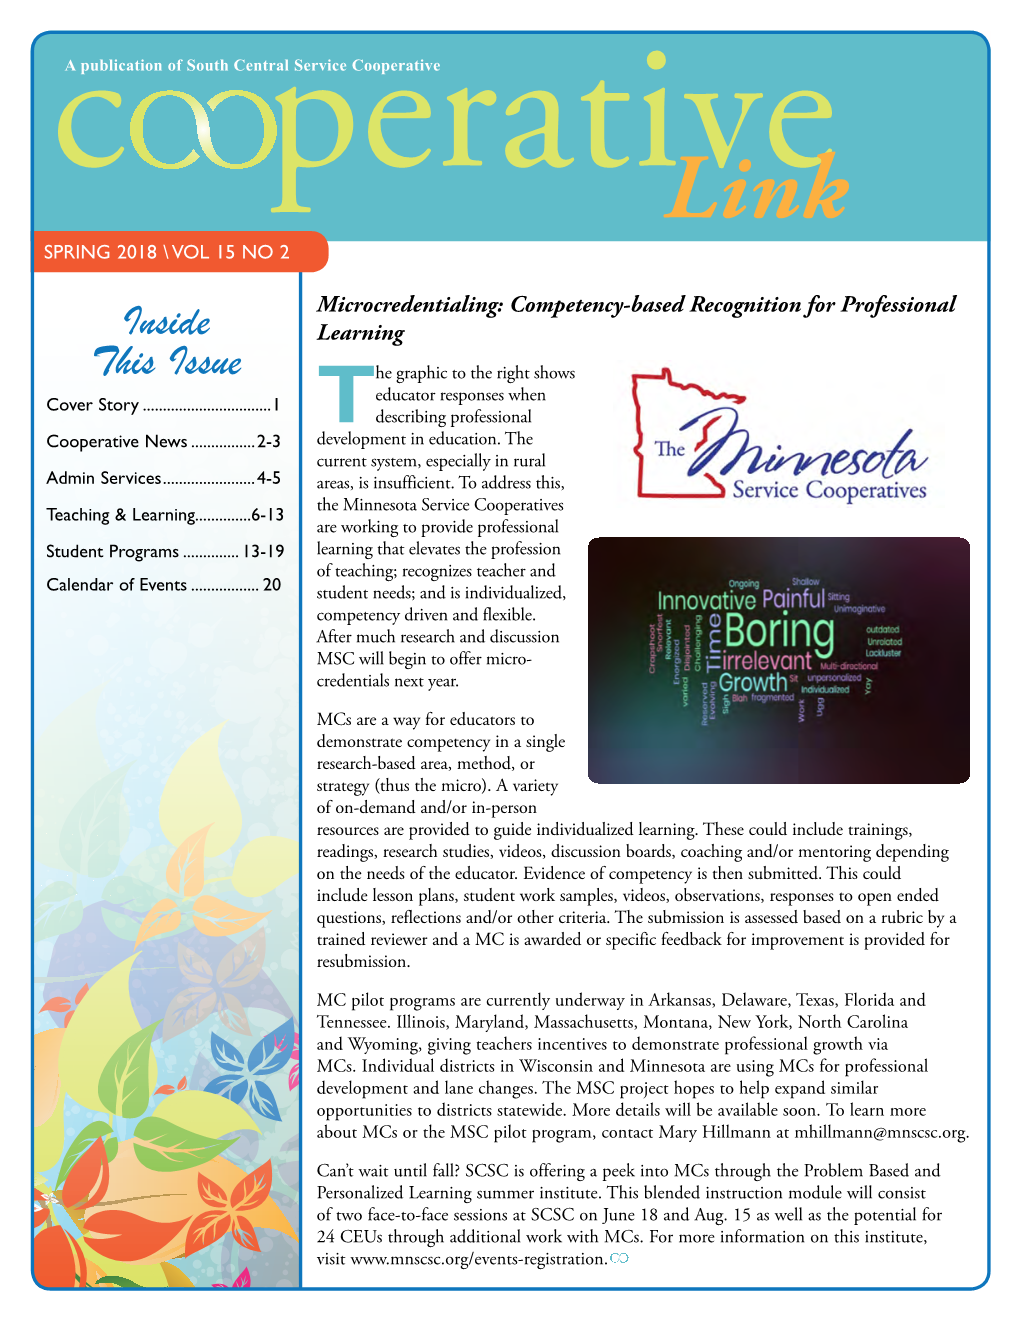 Inside This Issue: Recognition Ceremony Exemplary Character and Ethical Leadership Showcased at Overnor Dayton Proclaimed Recognition Ceremony